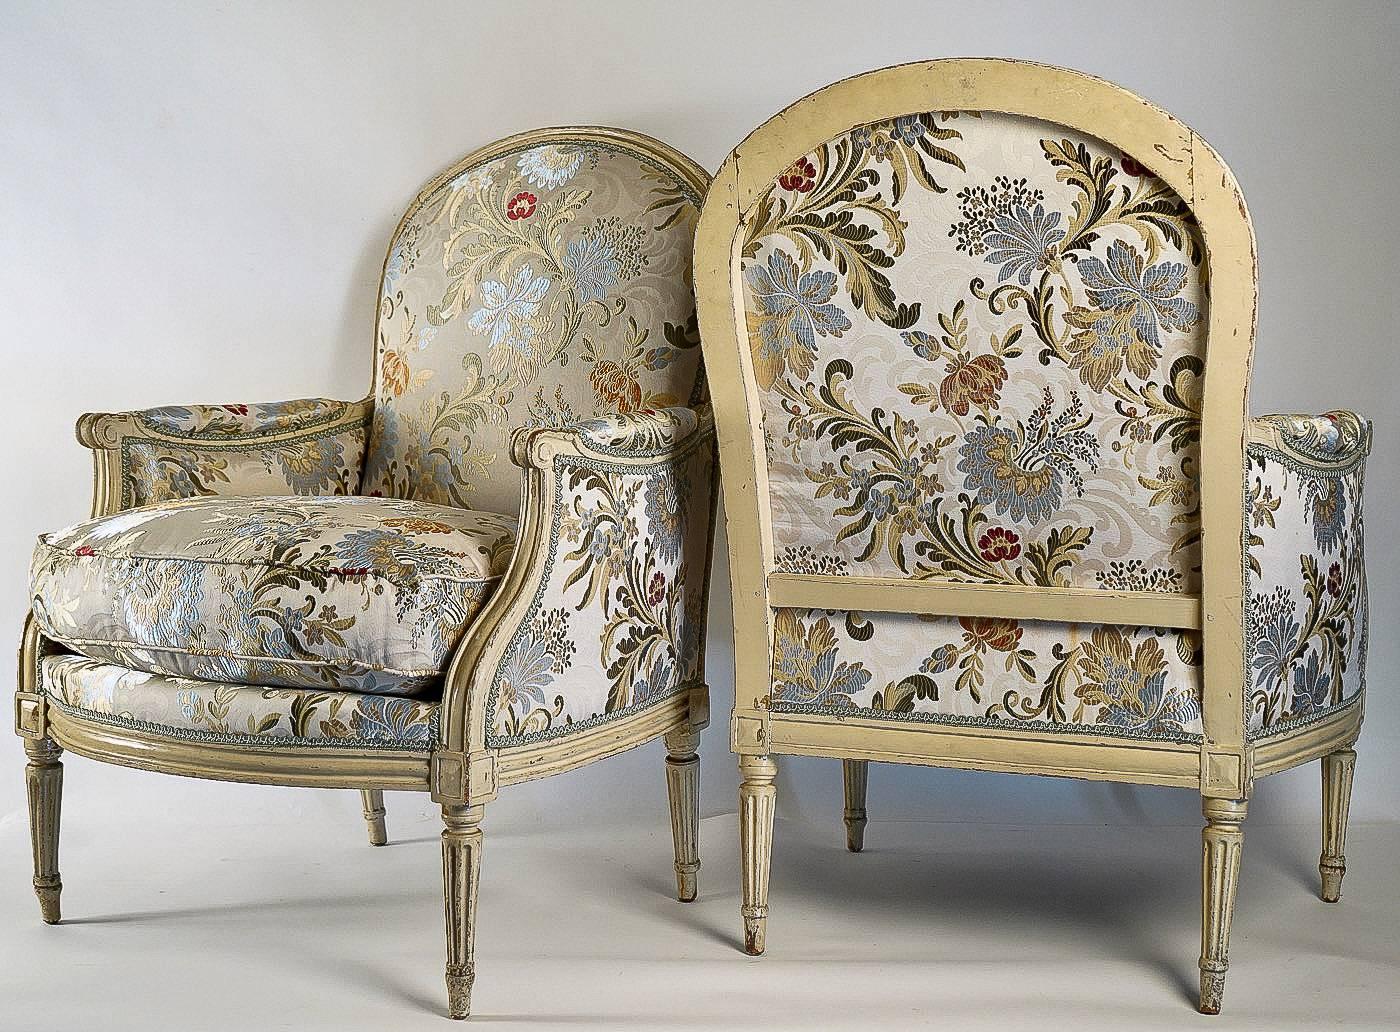 French 18th Century Lacquered Wood Pair of Large Bergeres Louis XVI Period, 1780 For Sale 5